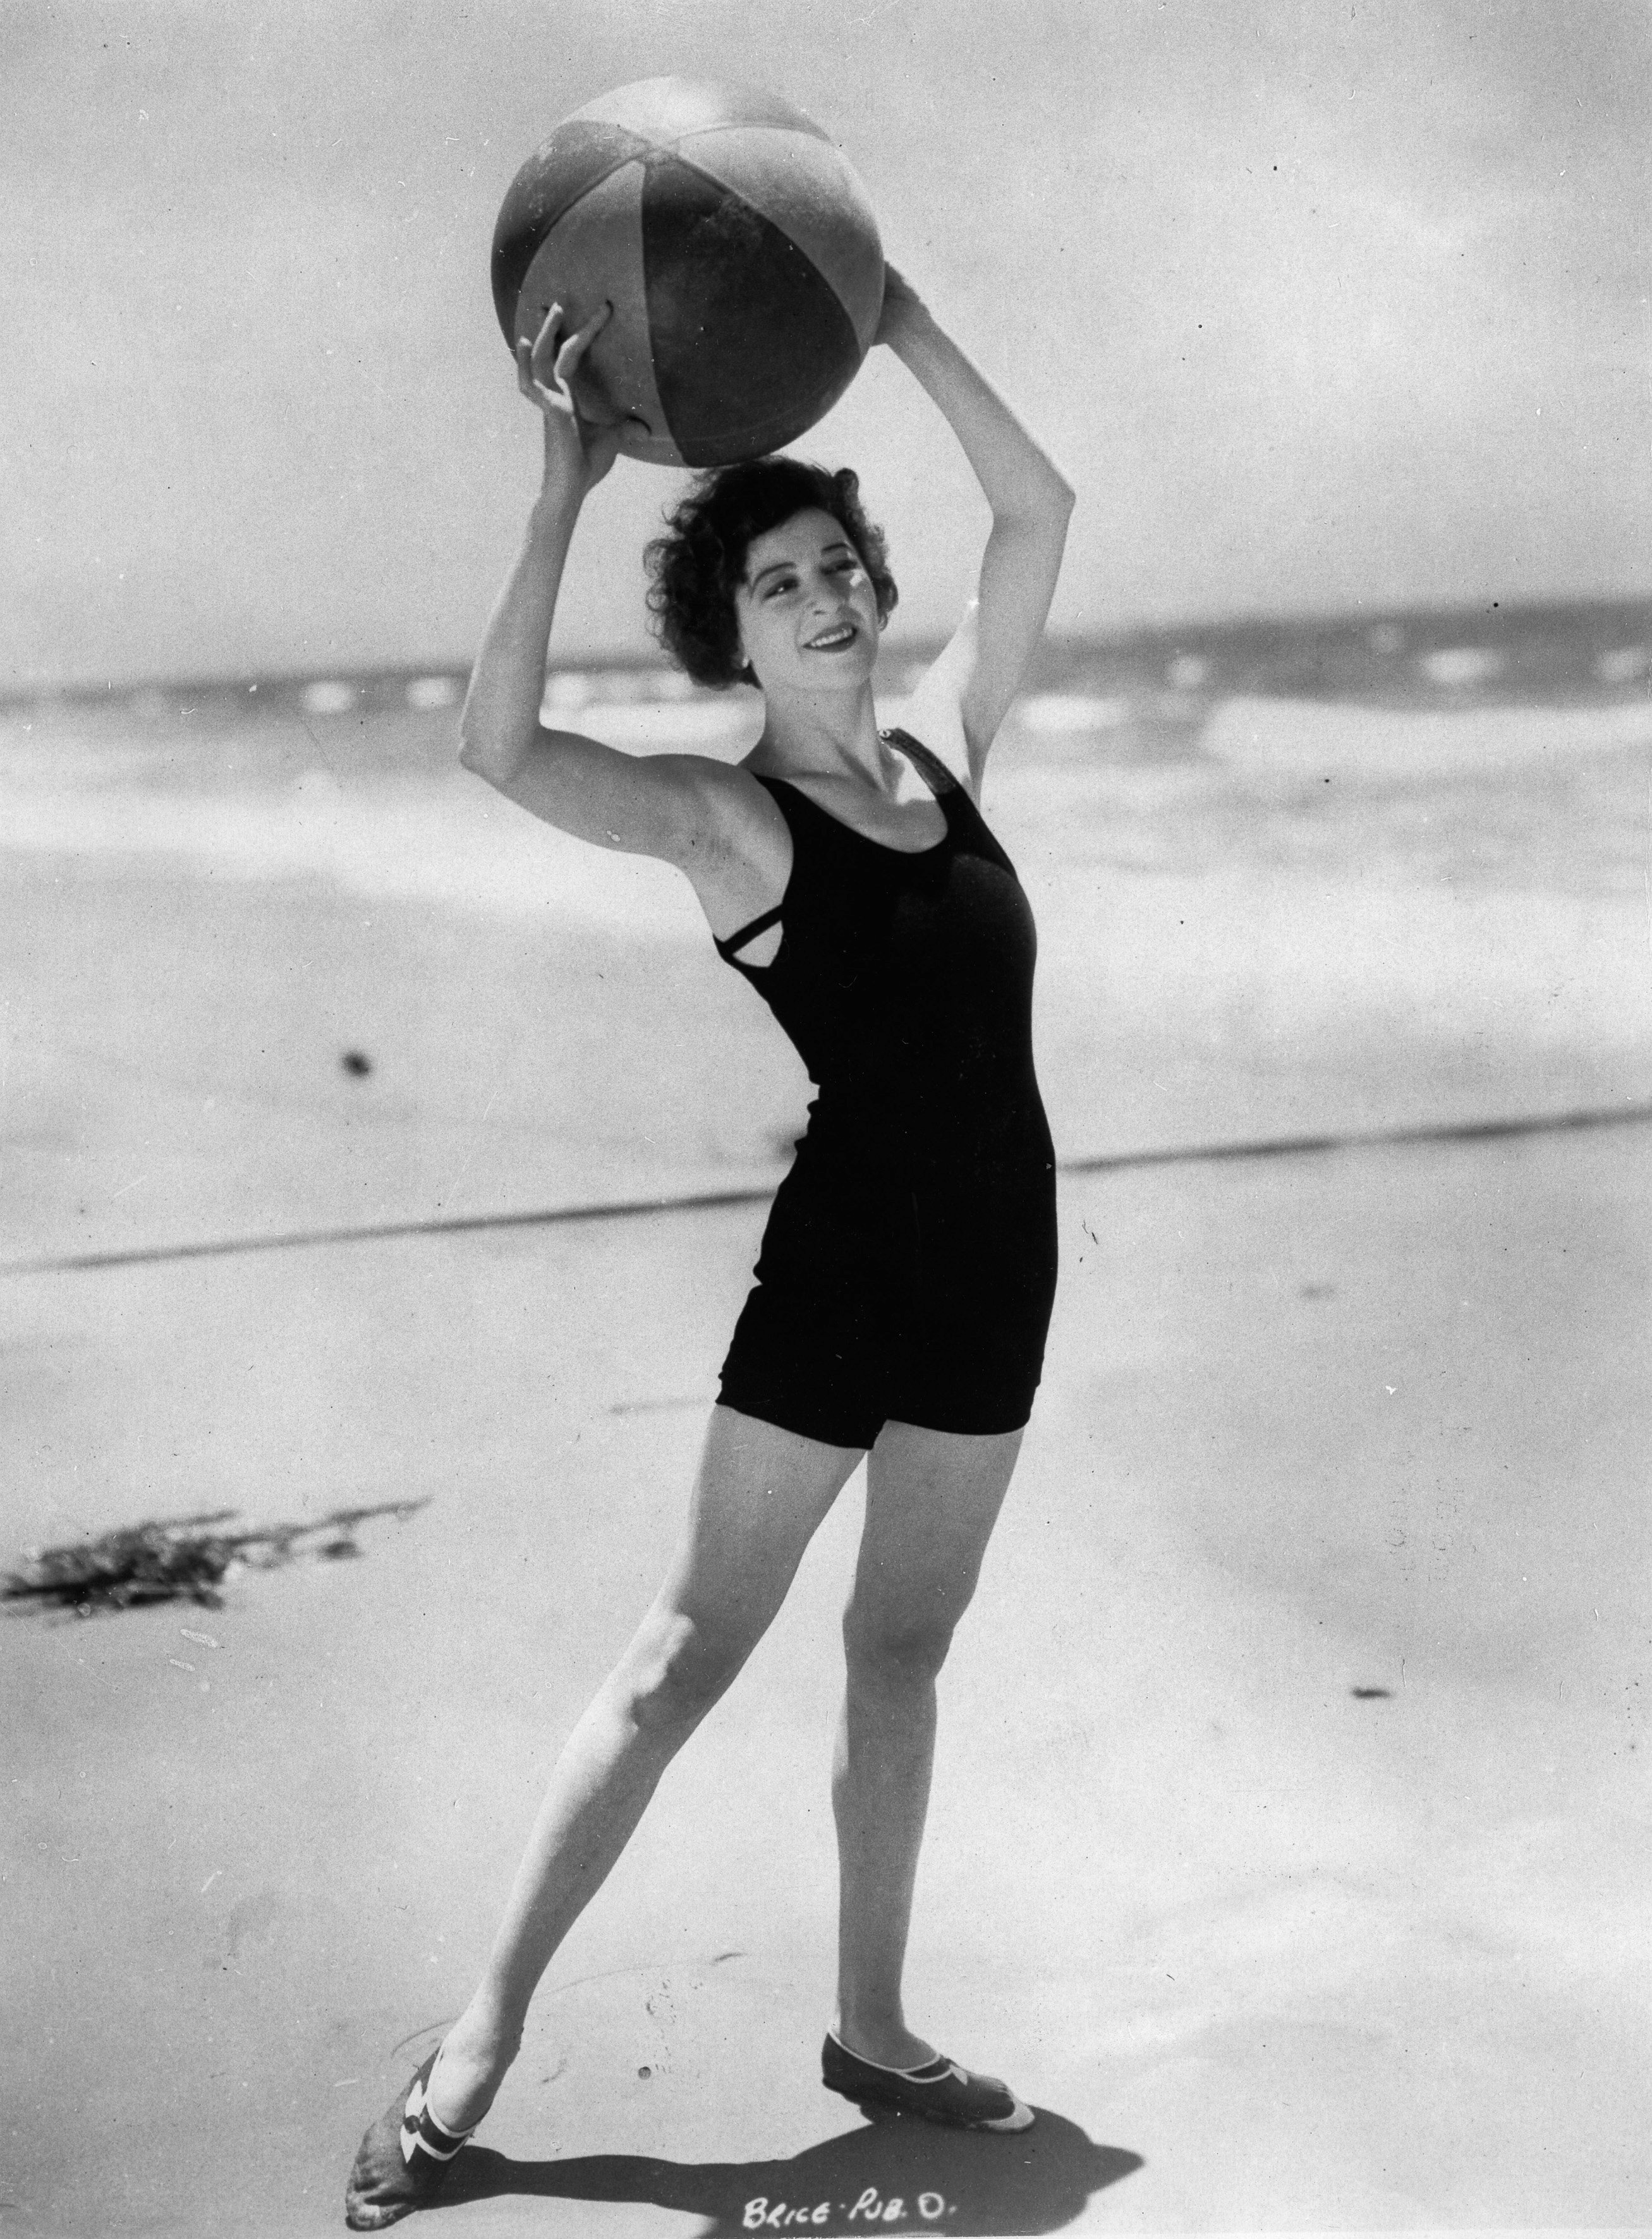 Fanny Brice. US-american comedian/ singer/ theatre and film actress. On a beach in California. About 1925. Photograph. (Photo by Imagno/Getty Images) Fanny Brice. US-amerikanische Komikerin/ Entertainerin/ Sängerin, Theater- und Filmschauspielerin. An ein